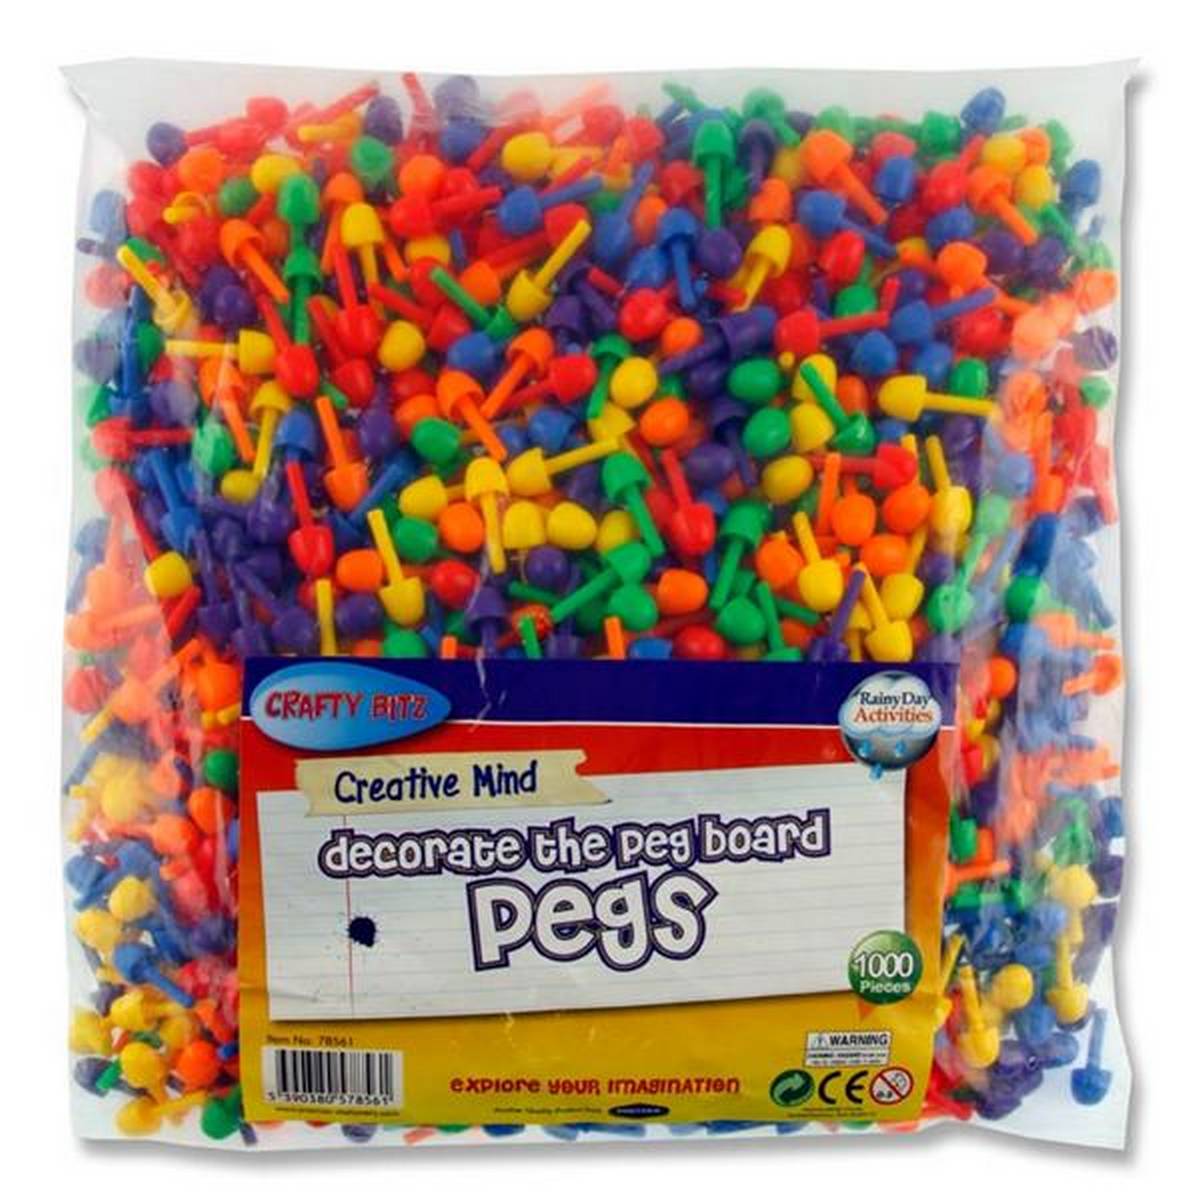 Coloured Pegs for Peg Boards Pack of 1,000